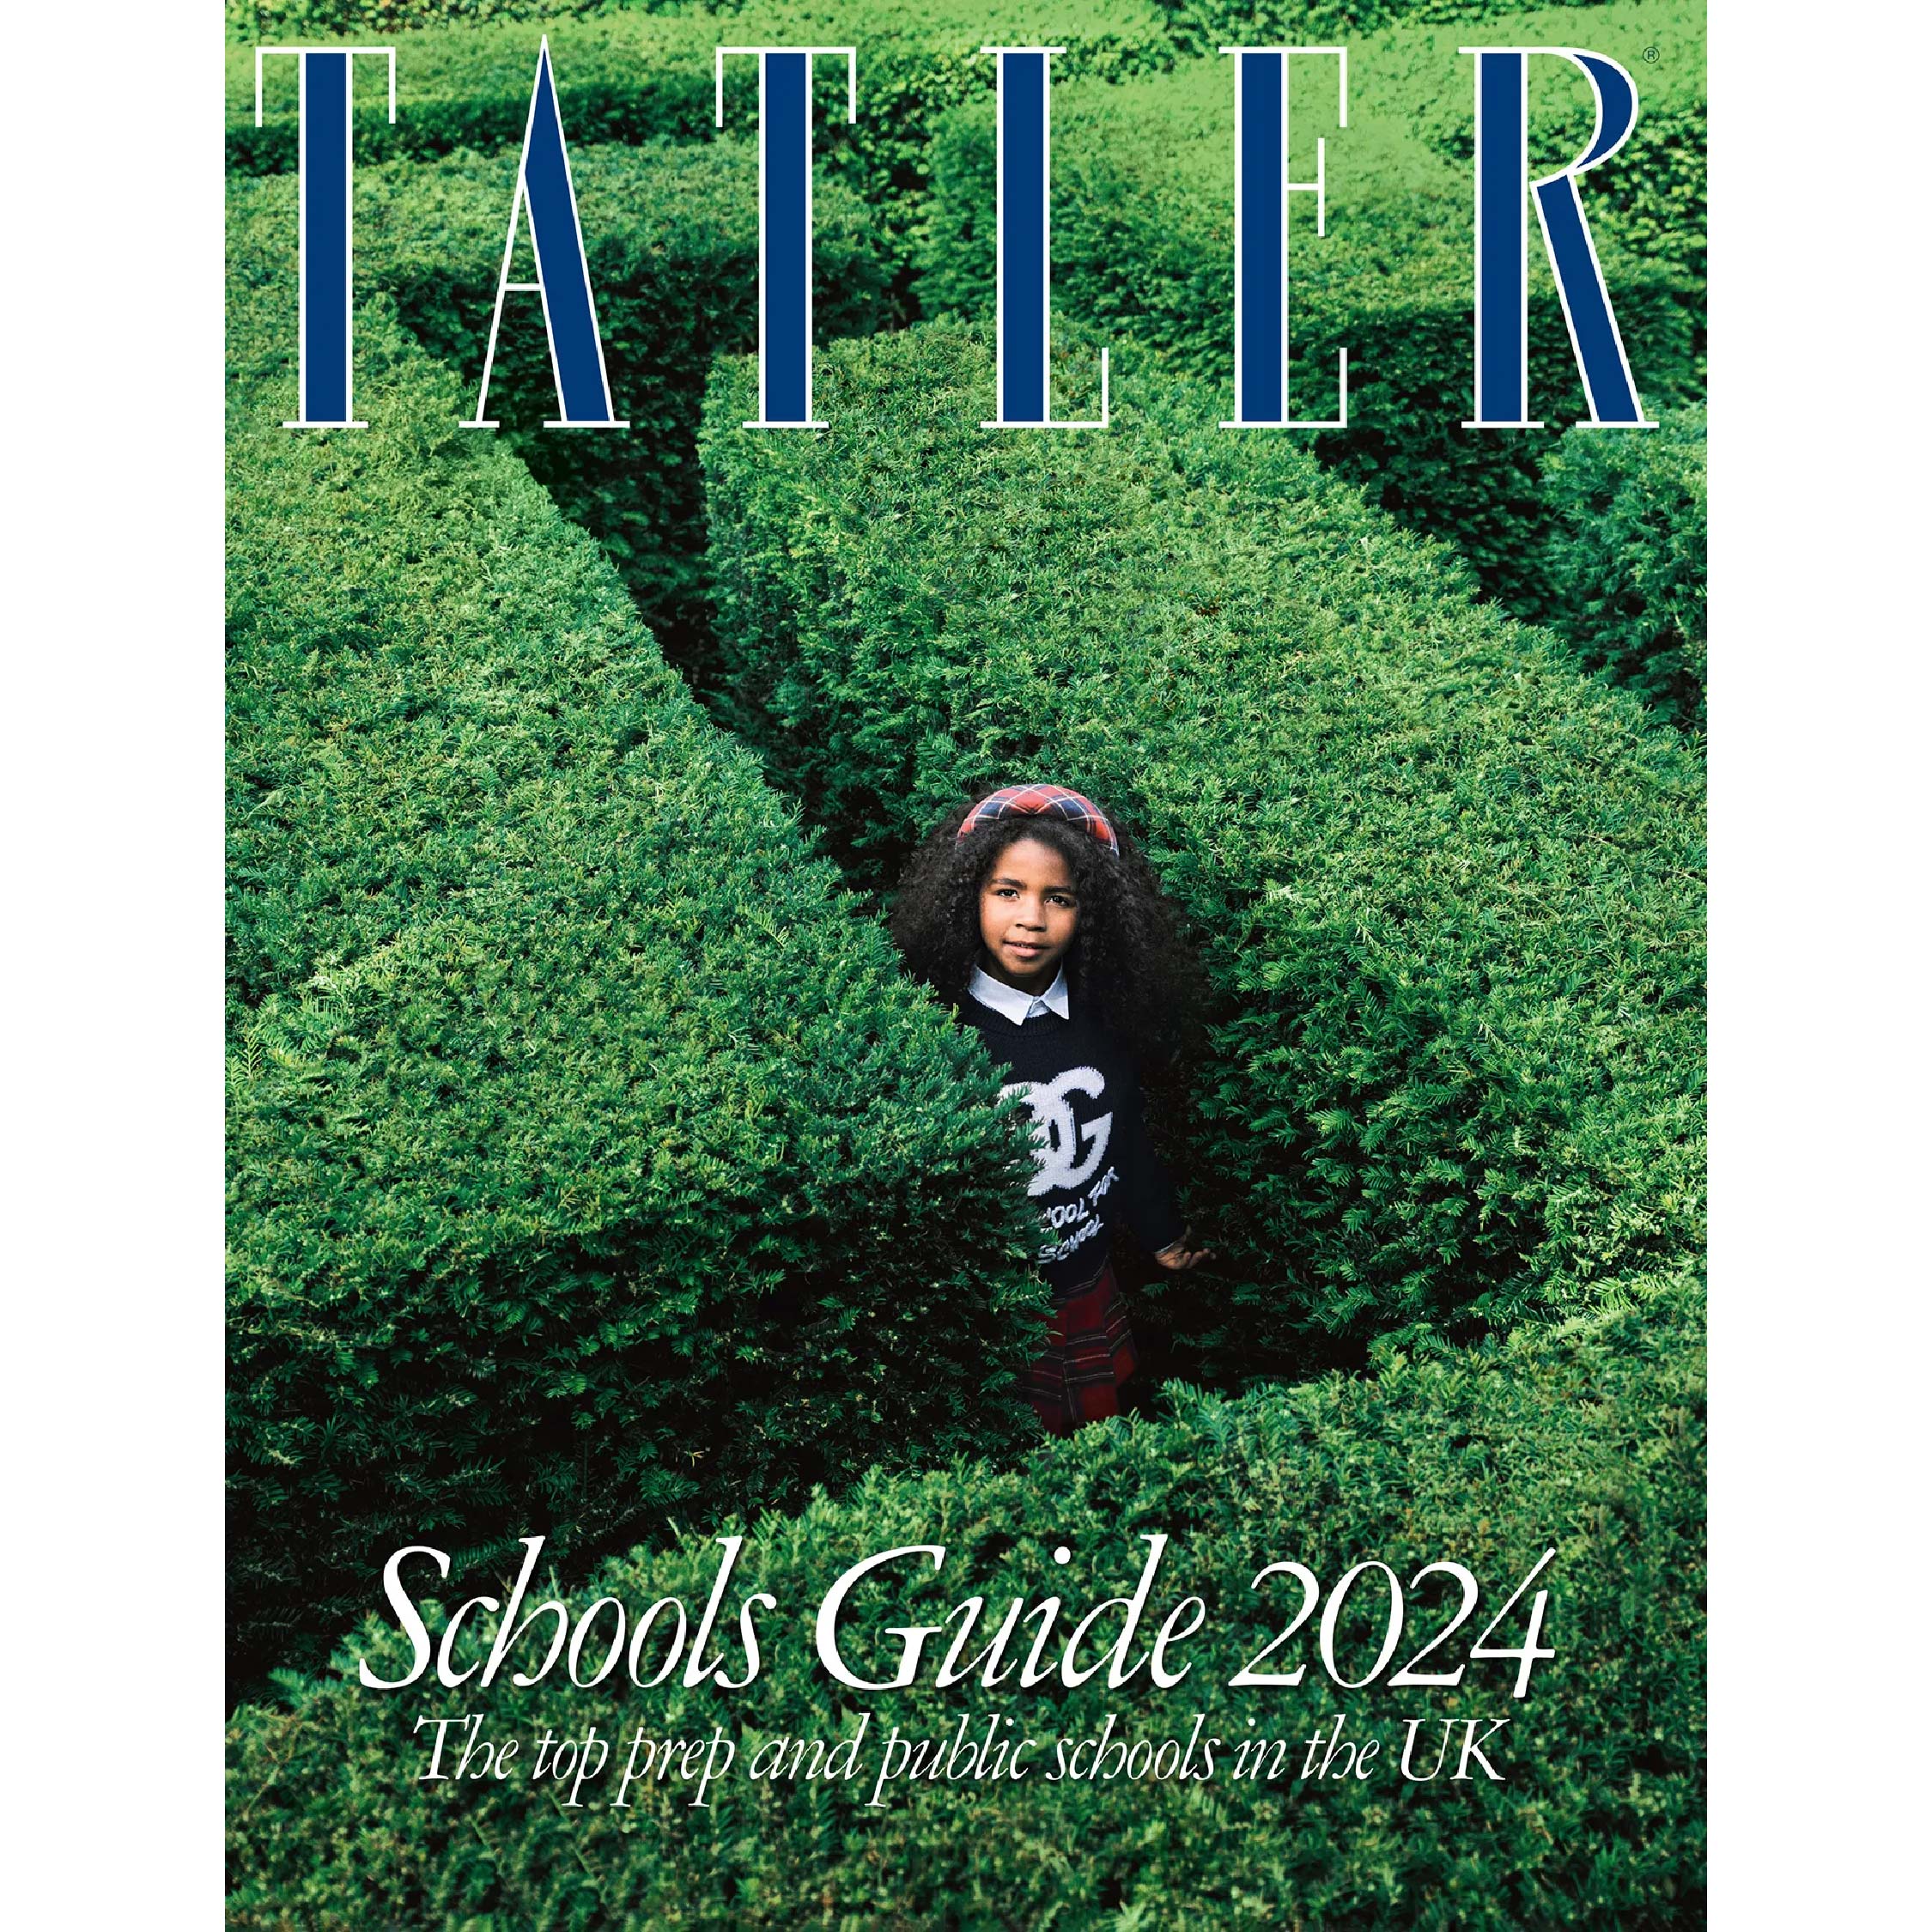 Sherborne Prep is featured in the Tatler Schools Guide for 2024!